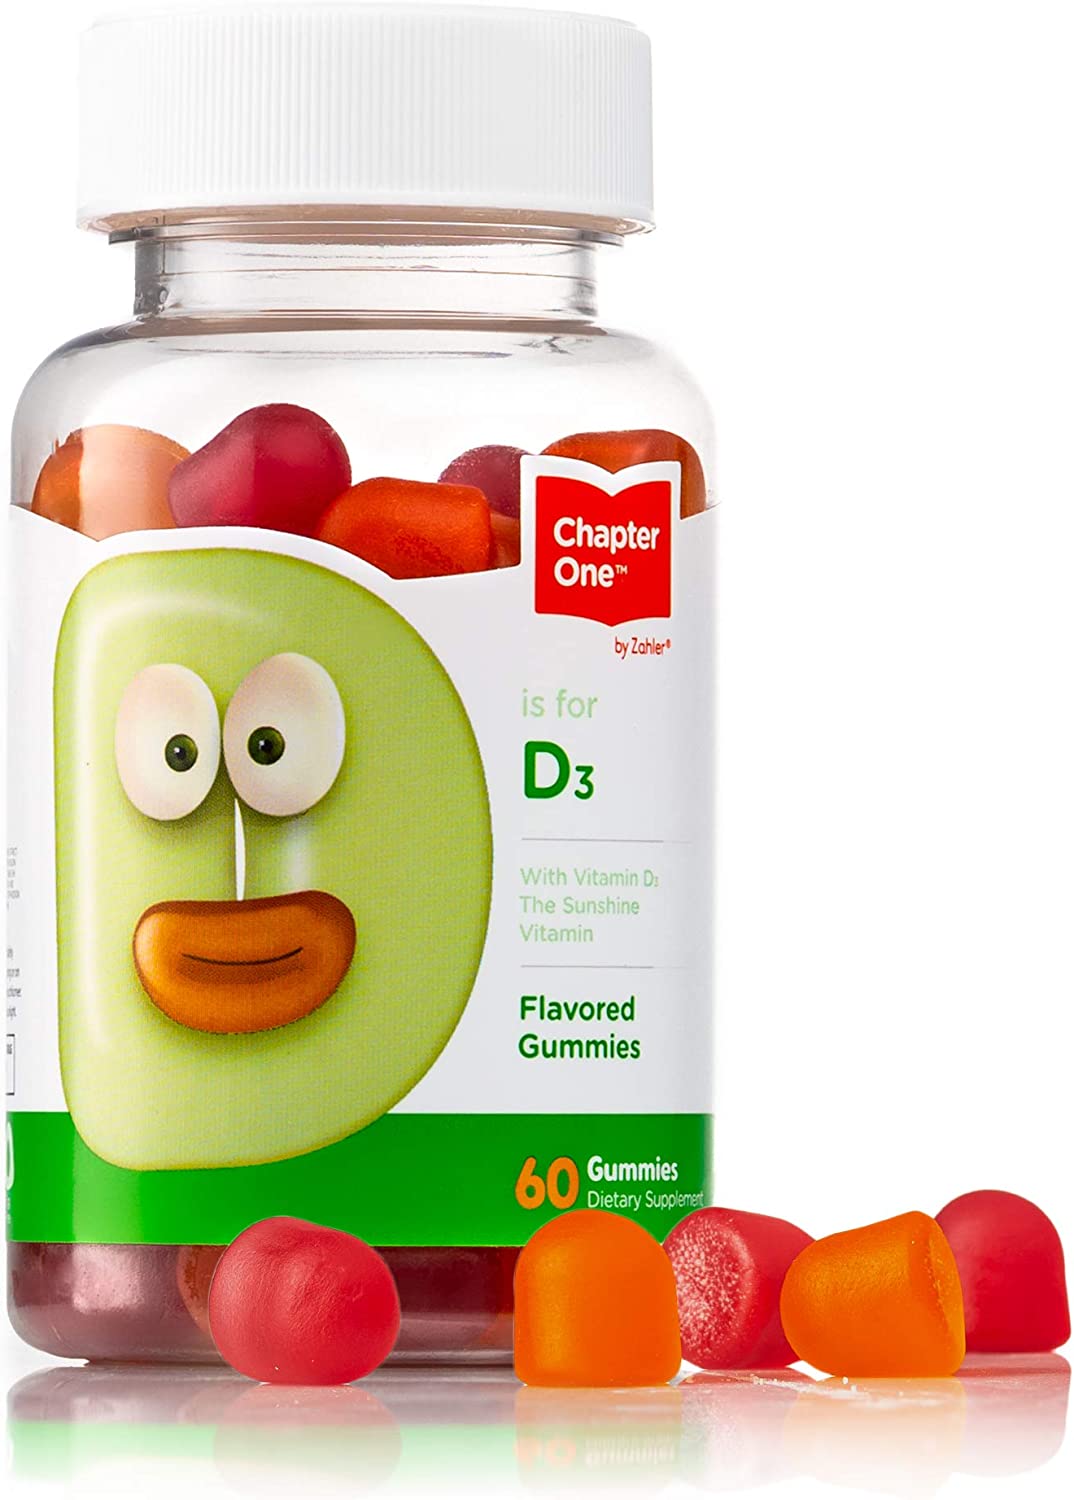 Chapter One Vitamin D3 (1000IU) Chewable Gummies for Kids $3.72 w/ S&S